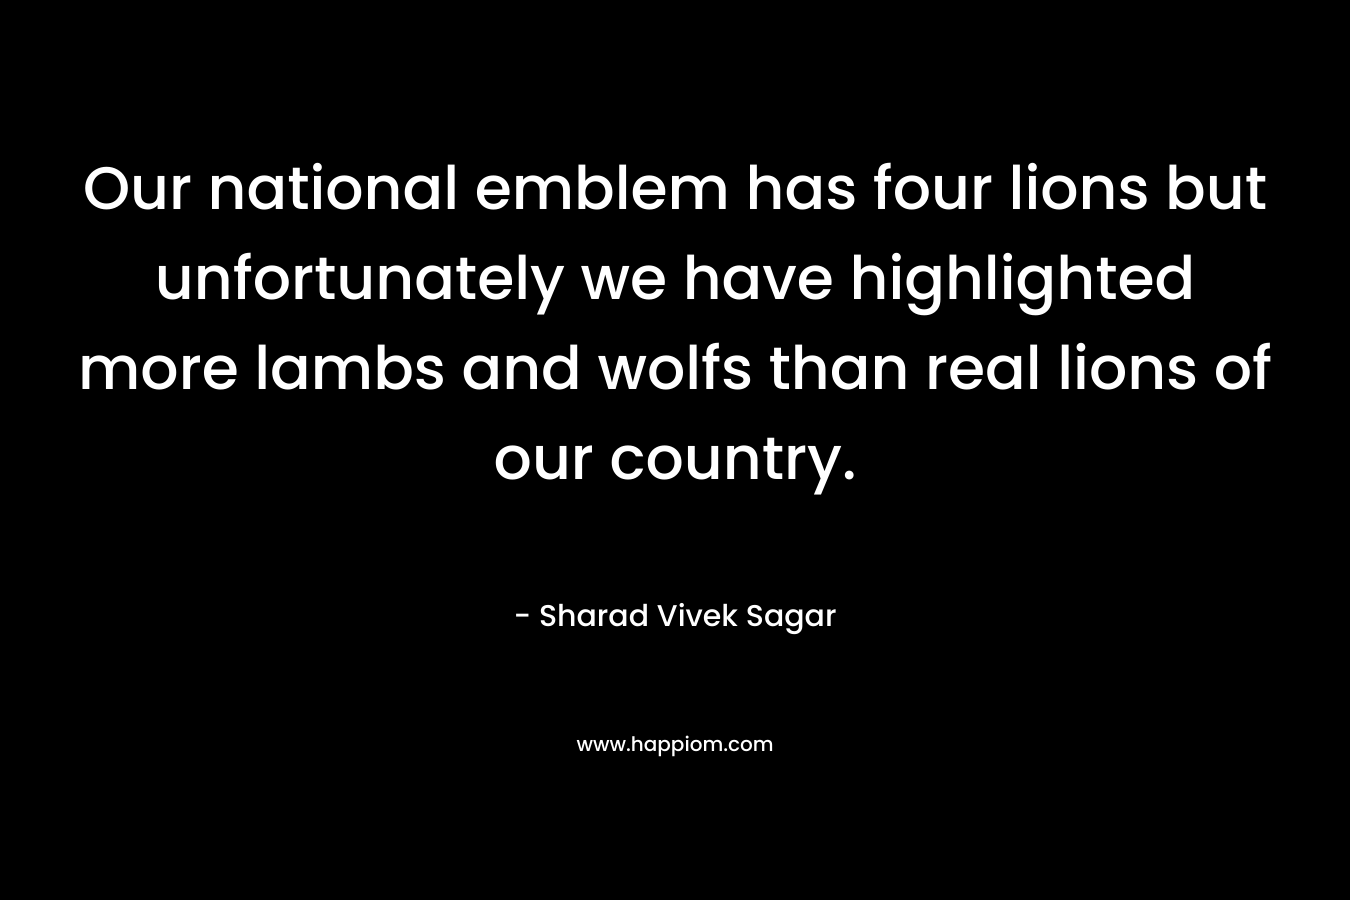 Our national emblem has four lions but unfortunately we have highlighted more lambs and wolfs than real lions of our country.